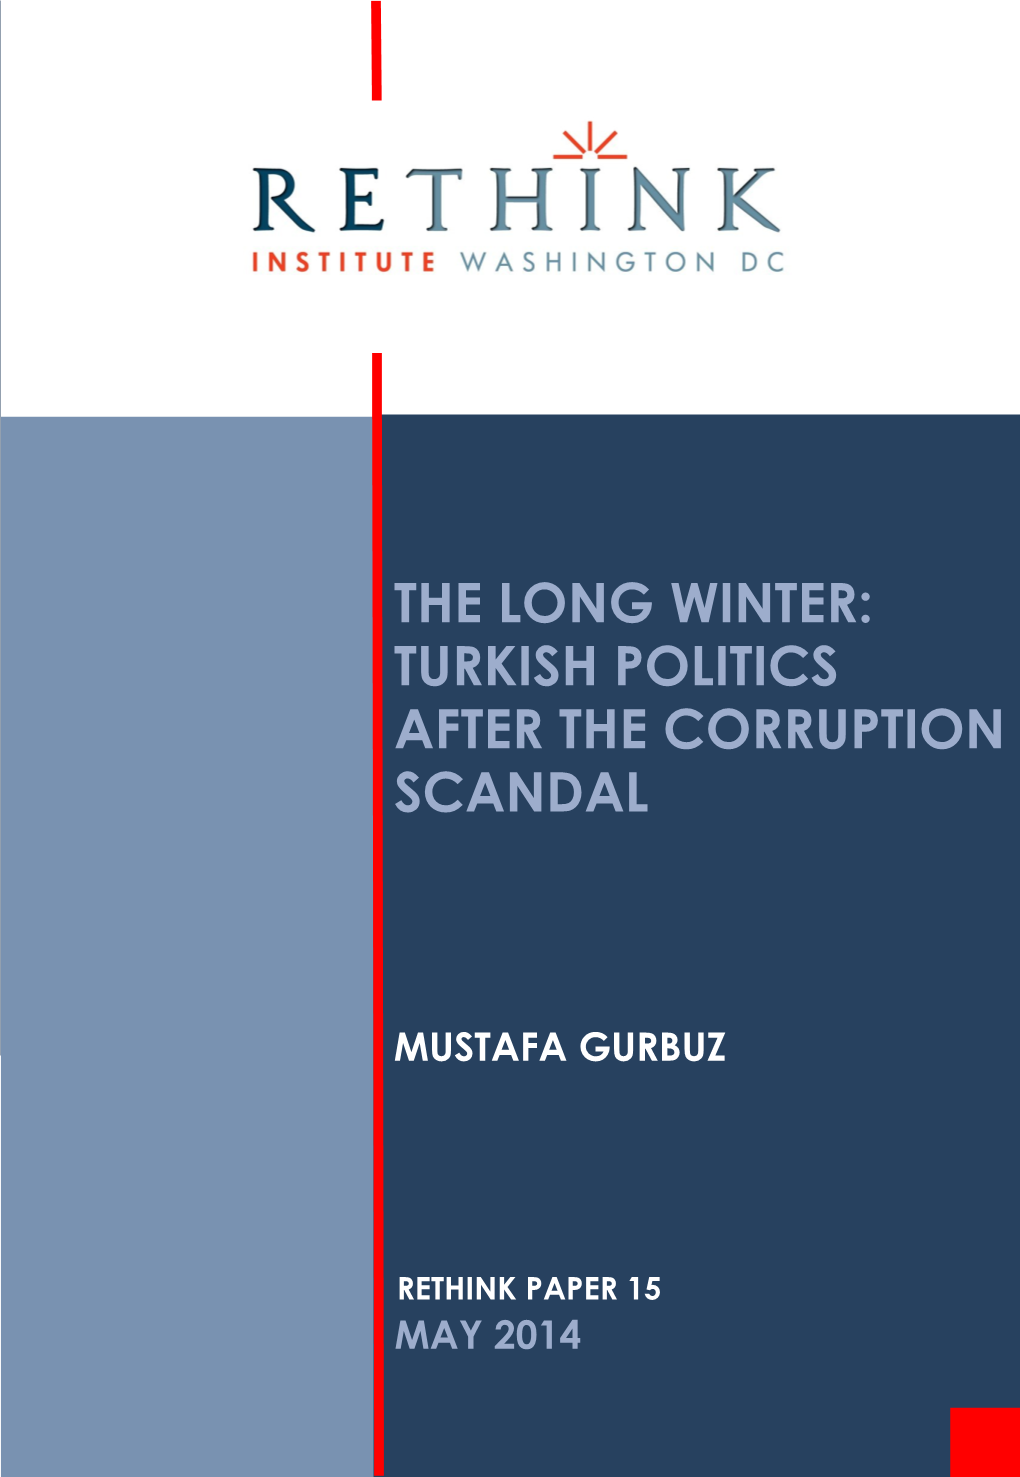 The Long Winter: Turkish Politics After the Corruption Scandal